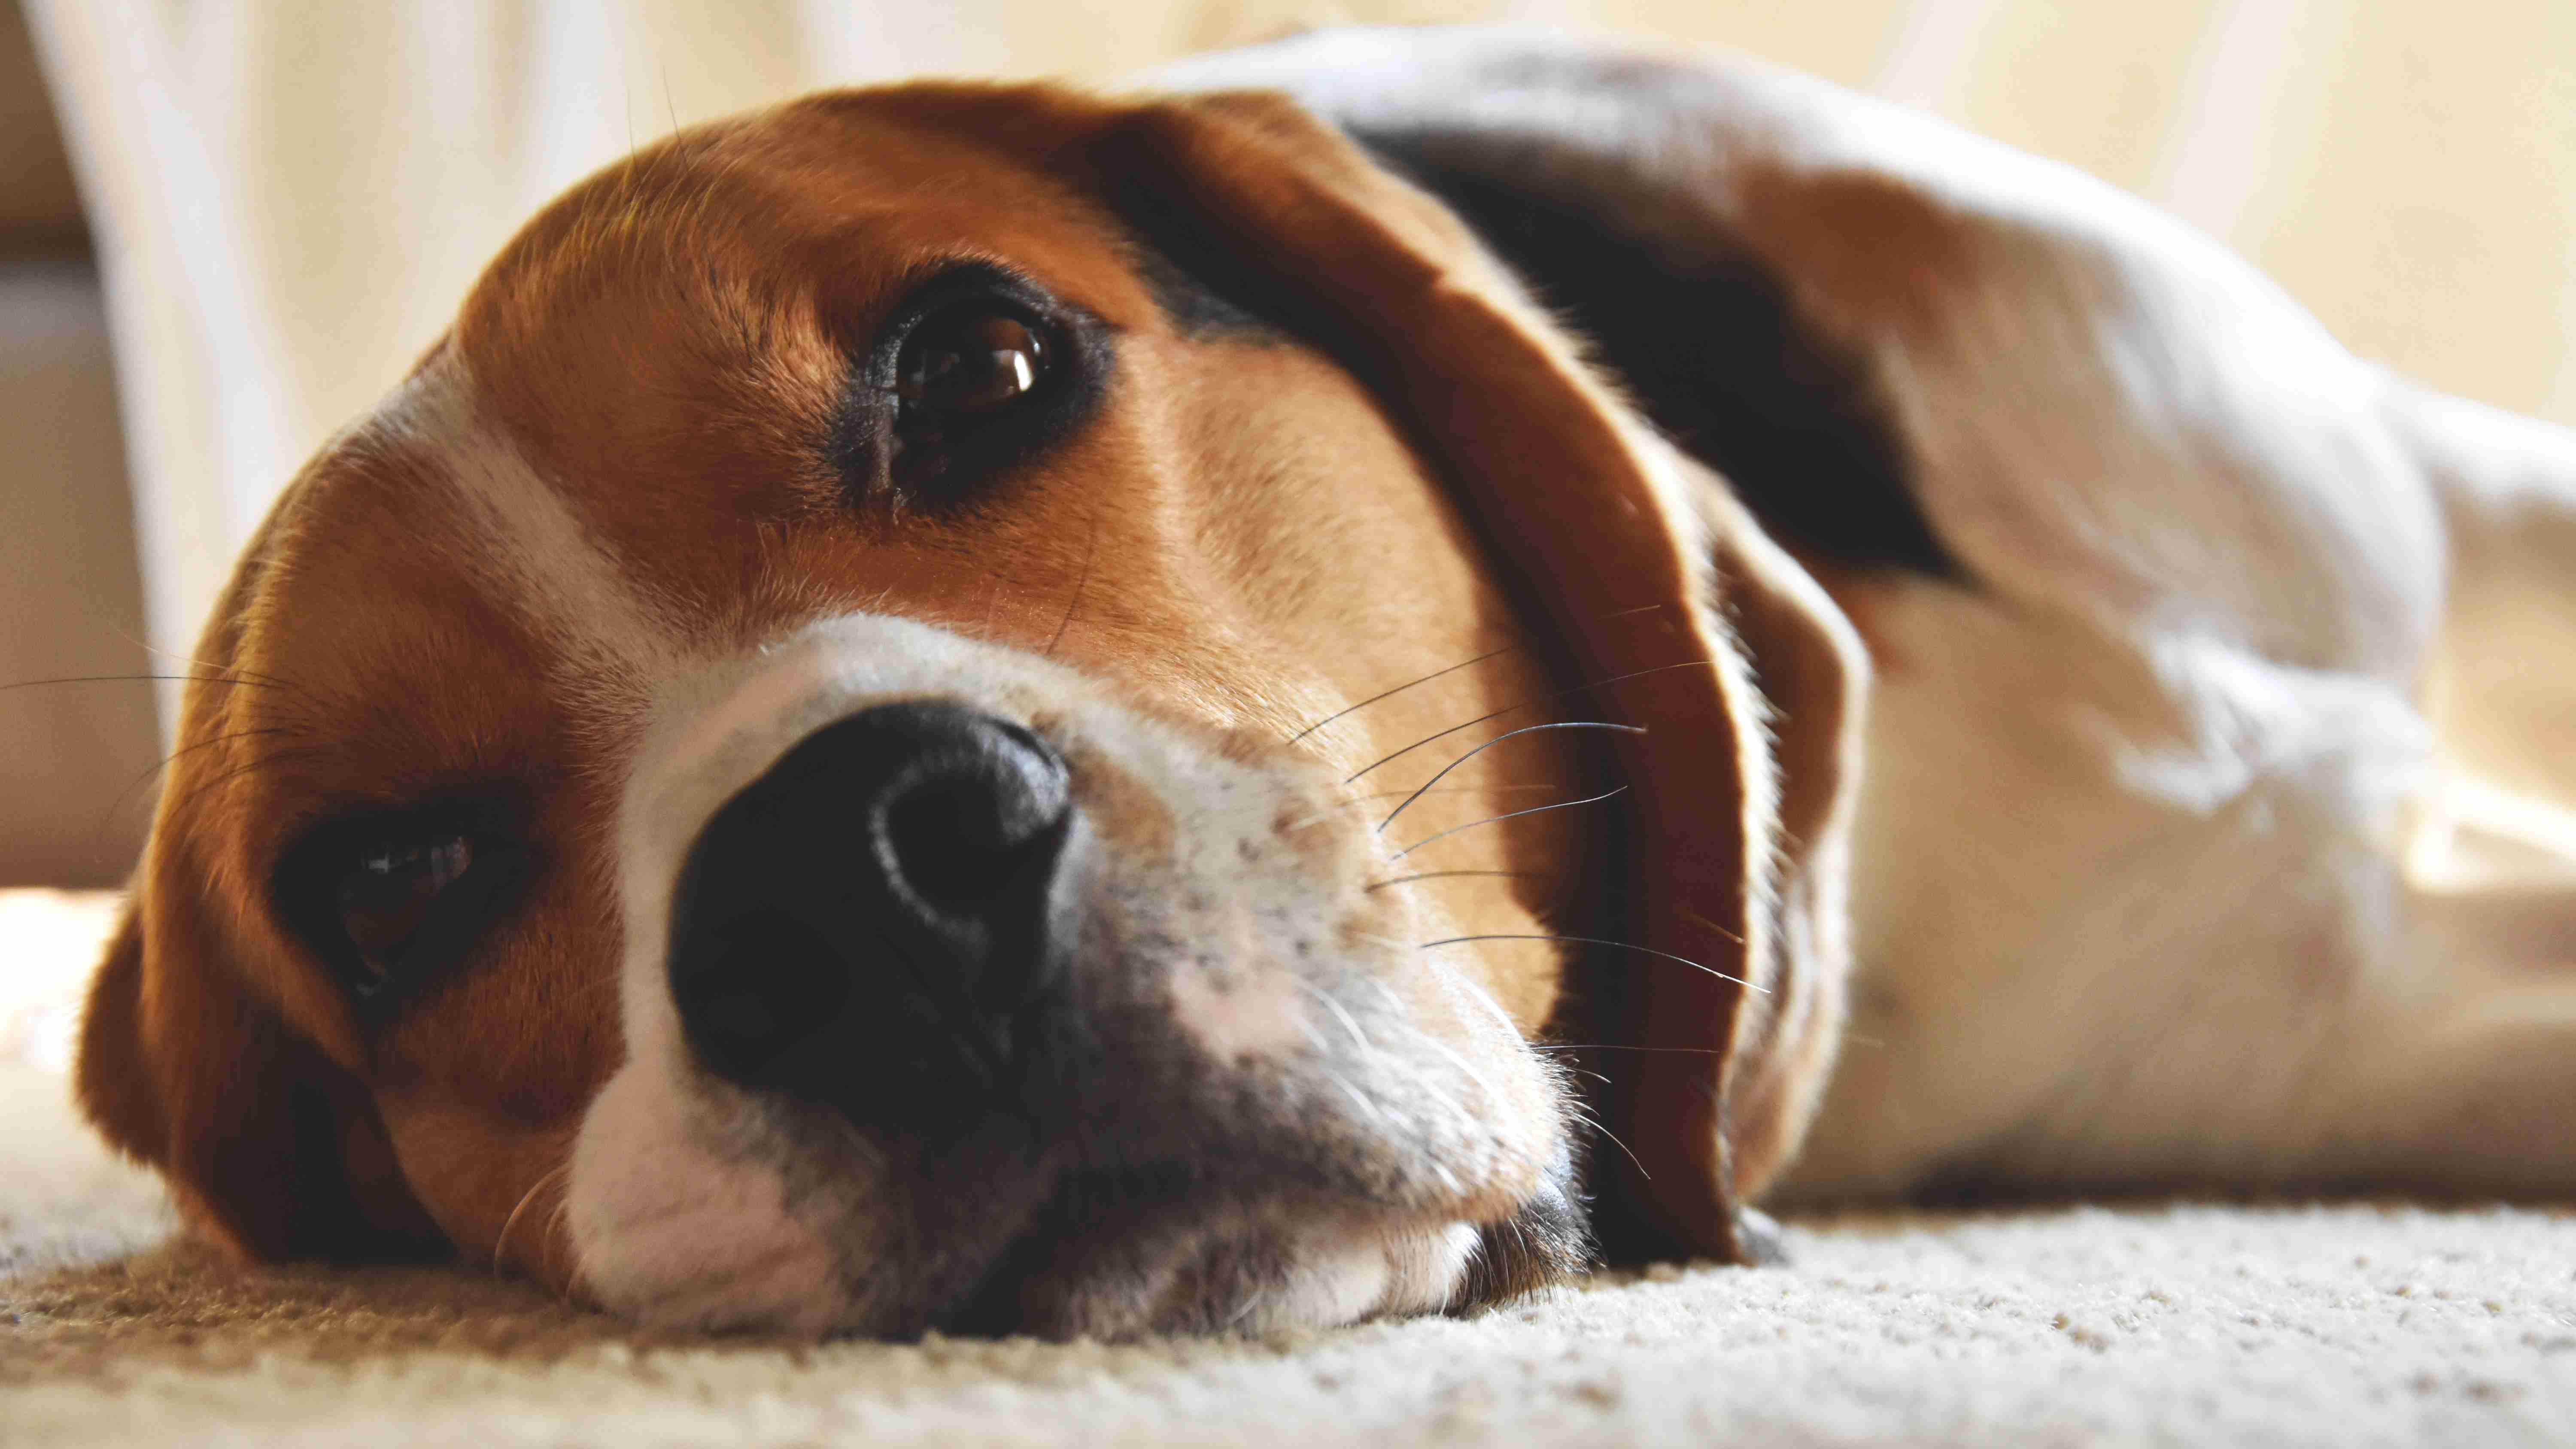 Uncovering the Truth: Do Beagles Have a Higher Risk of Developing Anxiety and Fear-based Behaviors?